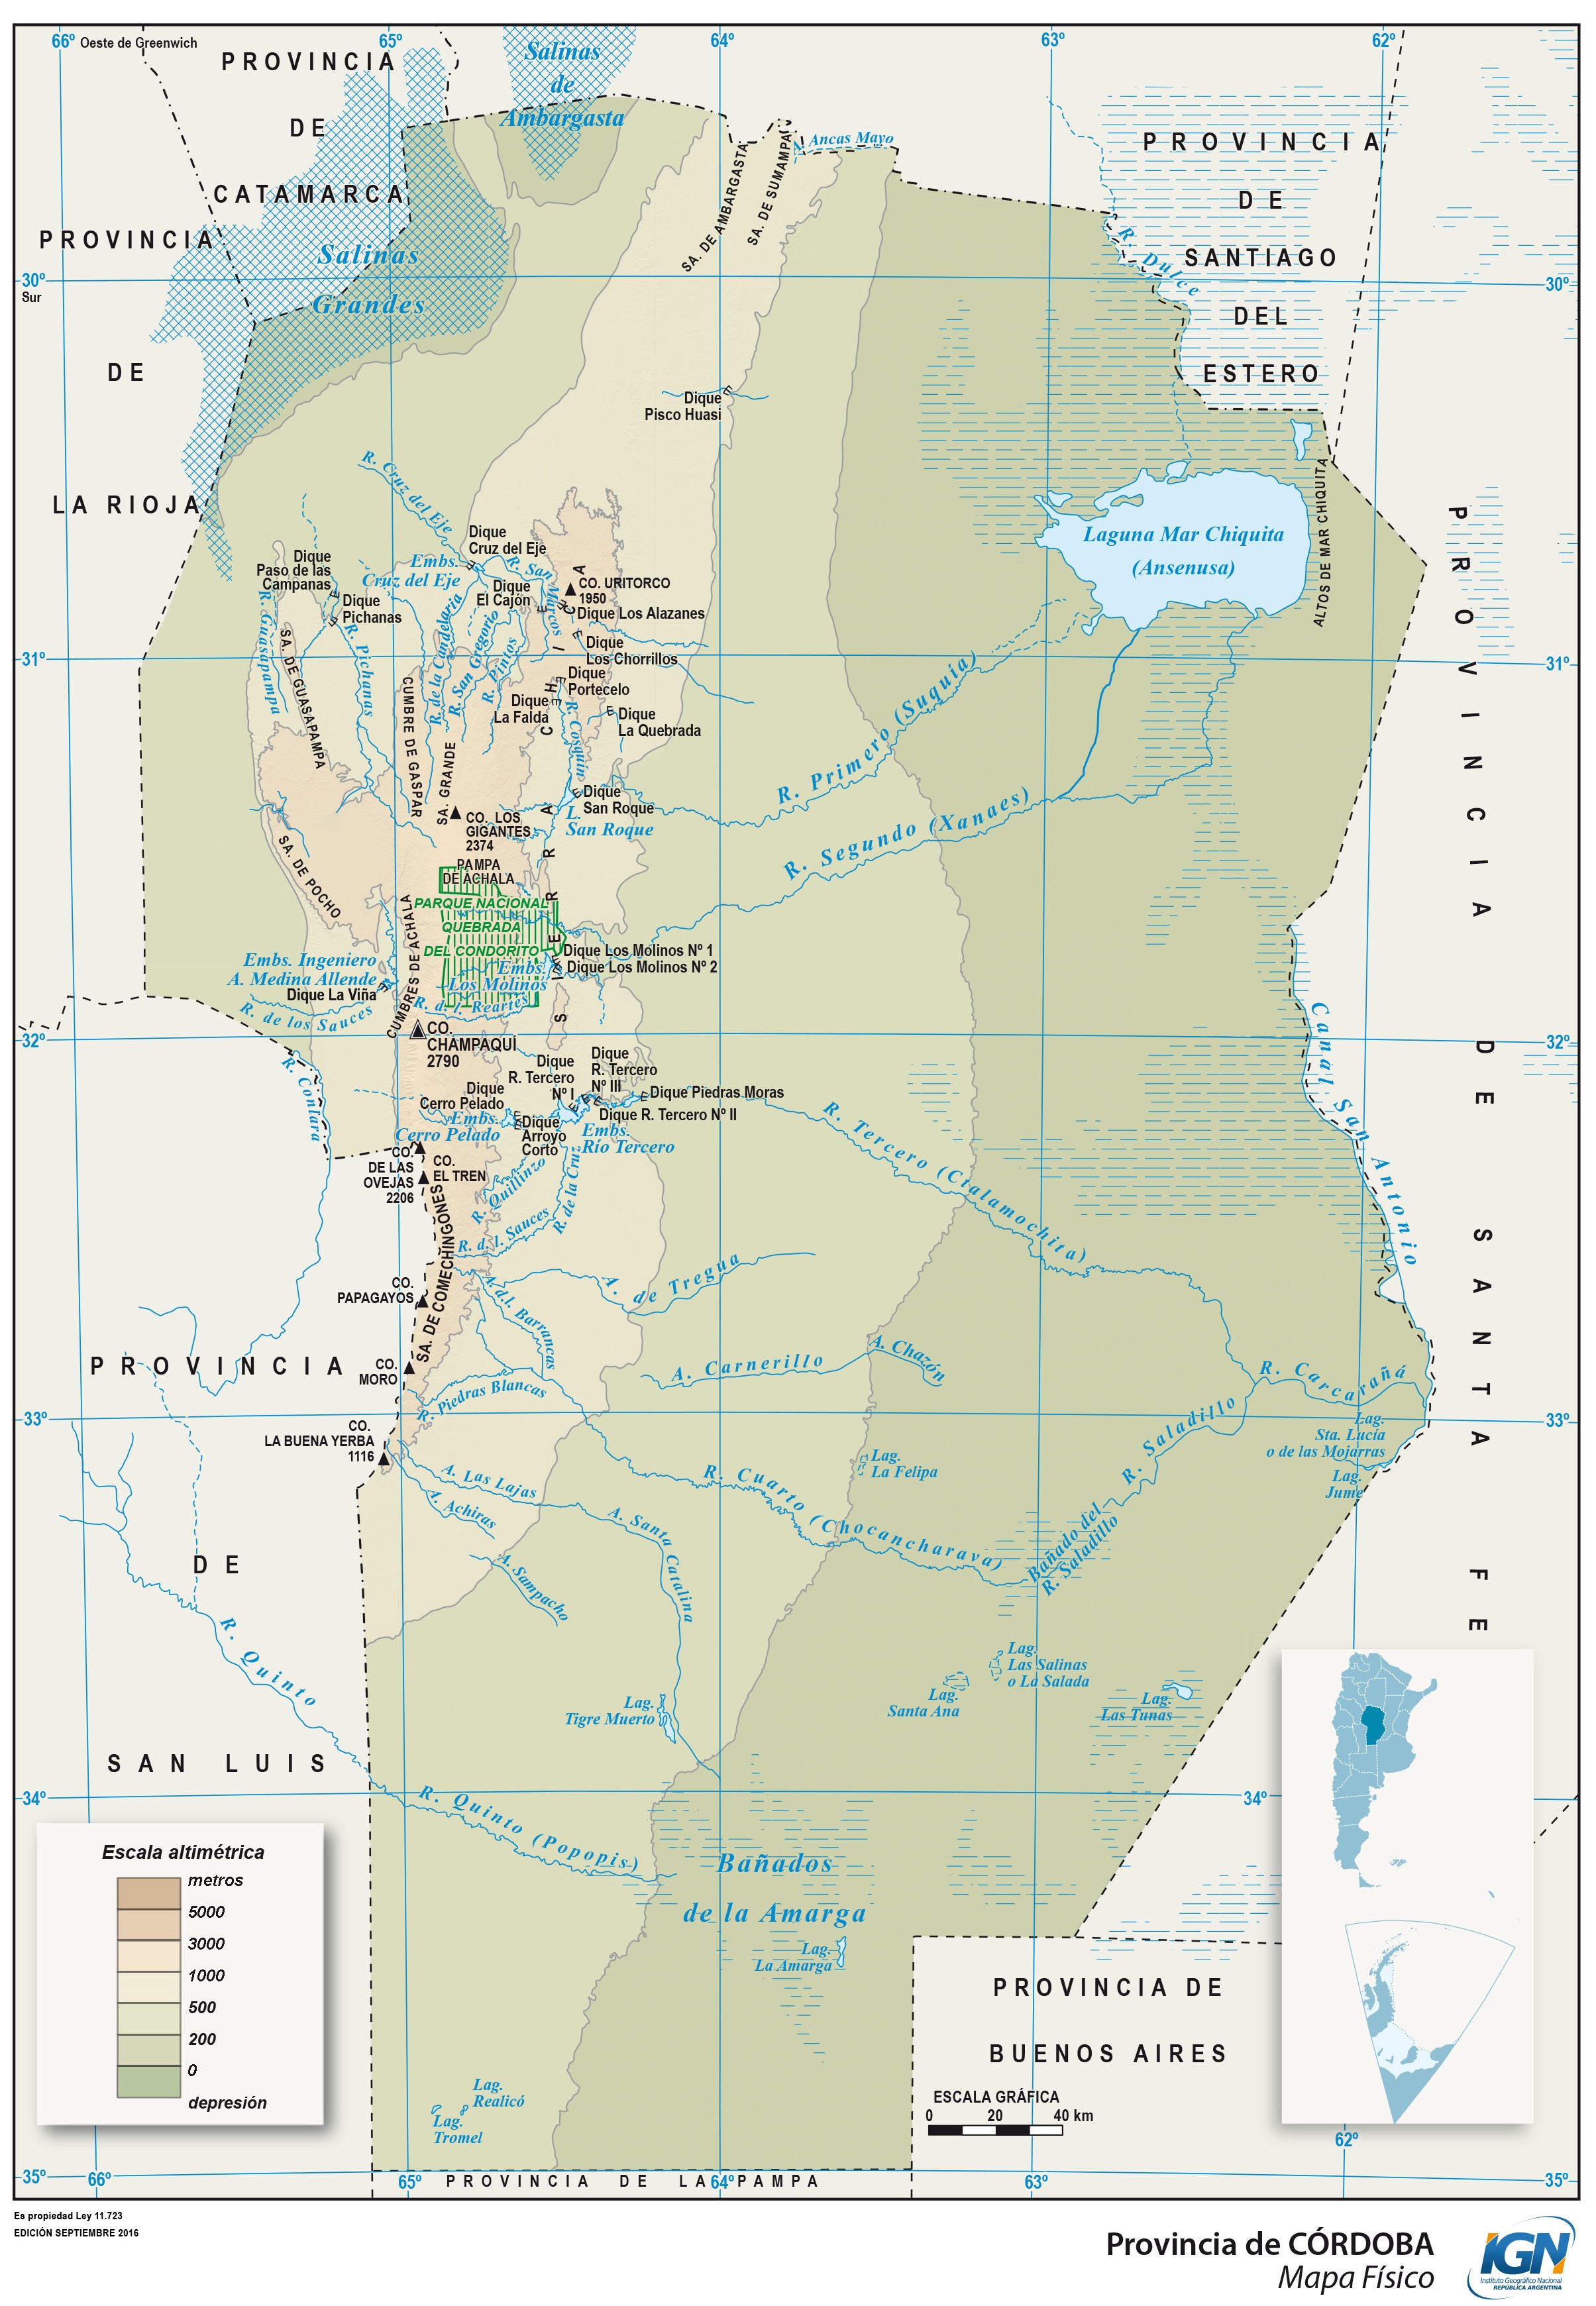 Physical map of the Province of Córdoba, Argentina - Full size | Gifex